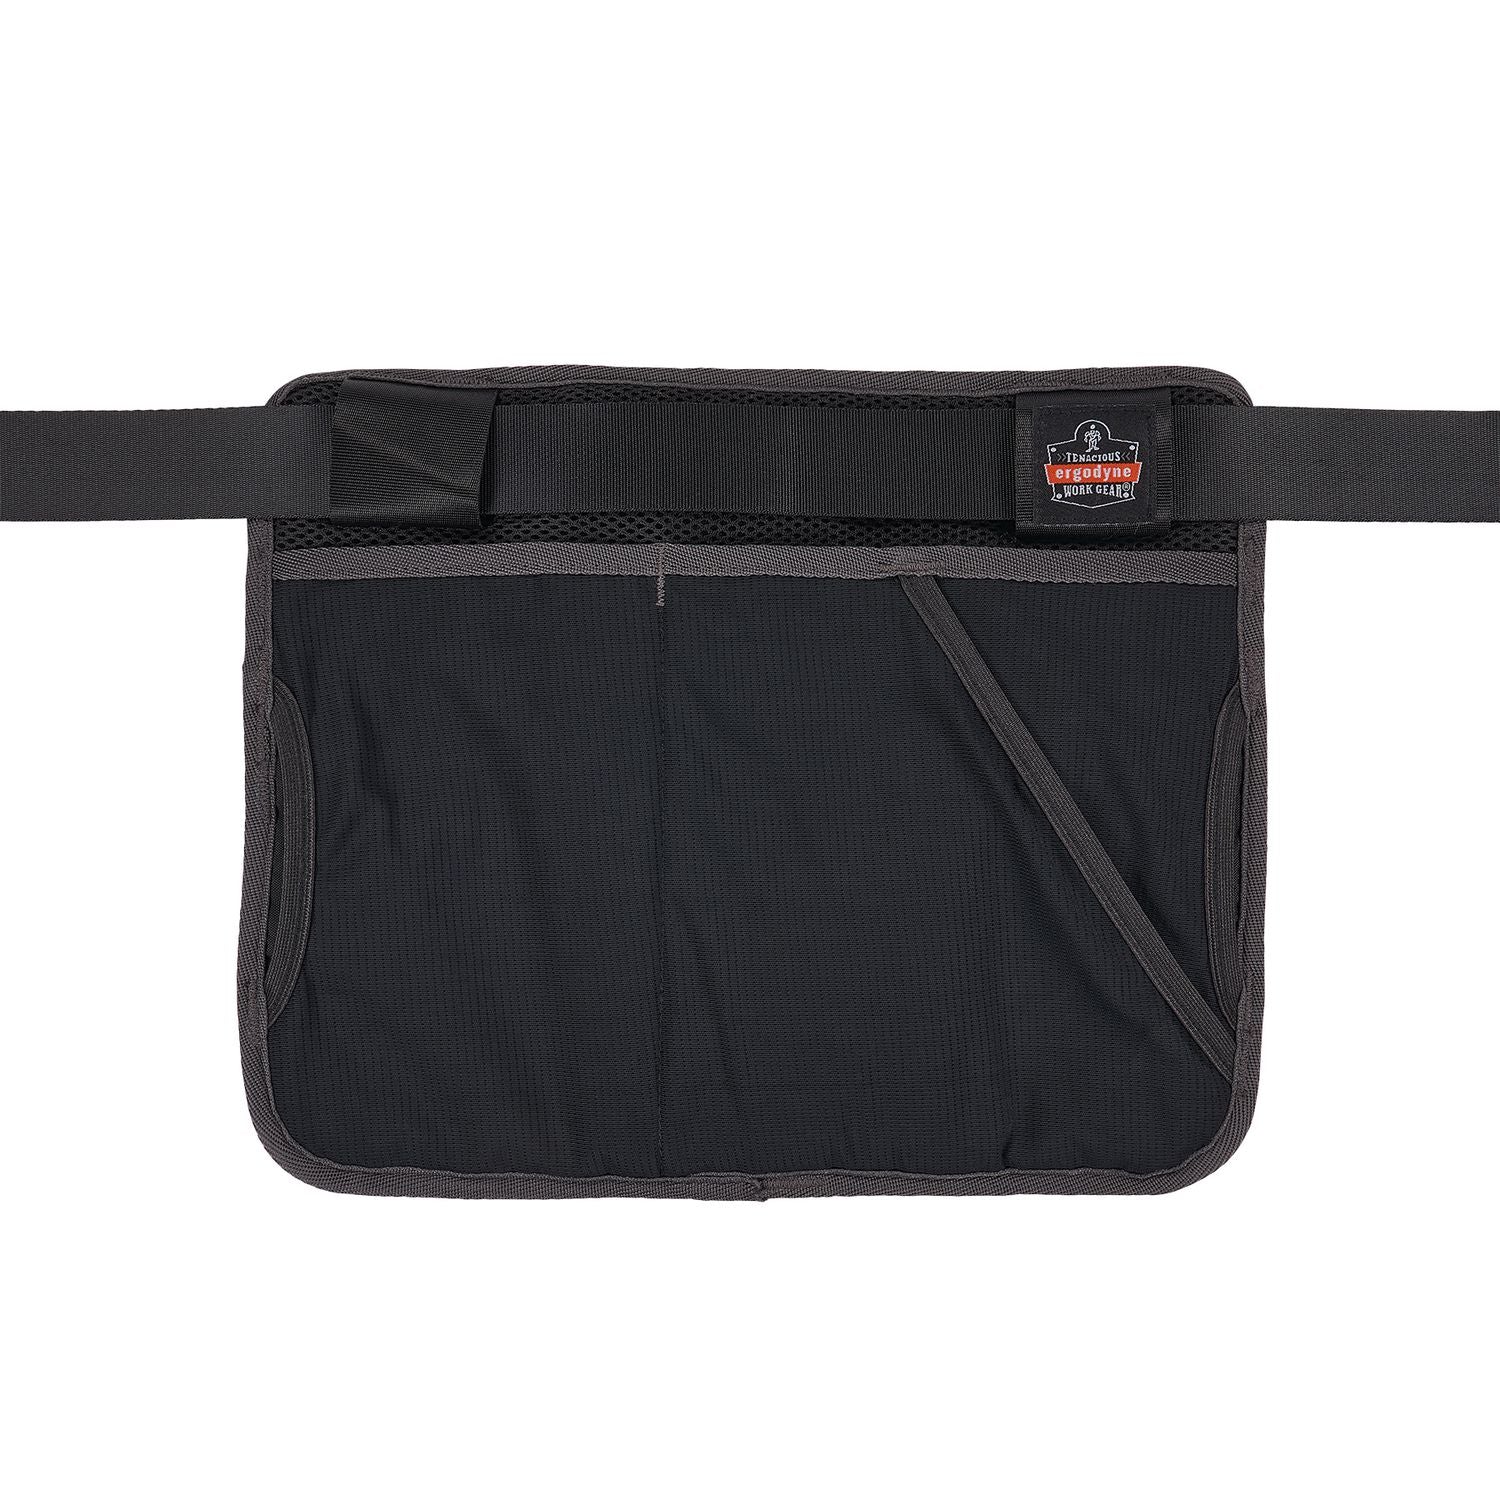 arsenal-5715-cleaning-apron-pouch-with-pockets-10-compartments-11-x-135-nylon-black-ships-in-1-3-business-days_ego13718 - 8